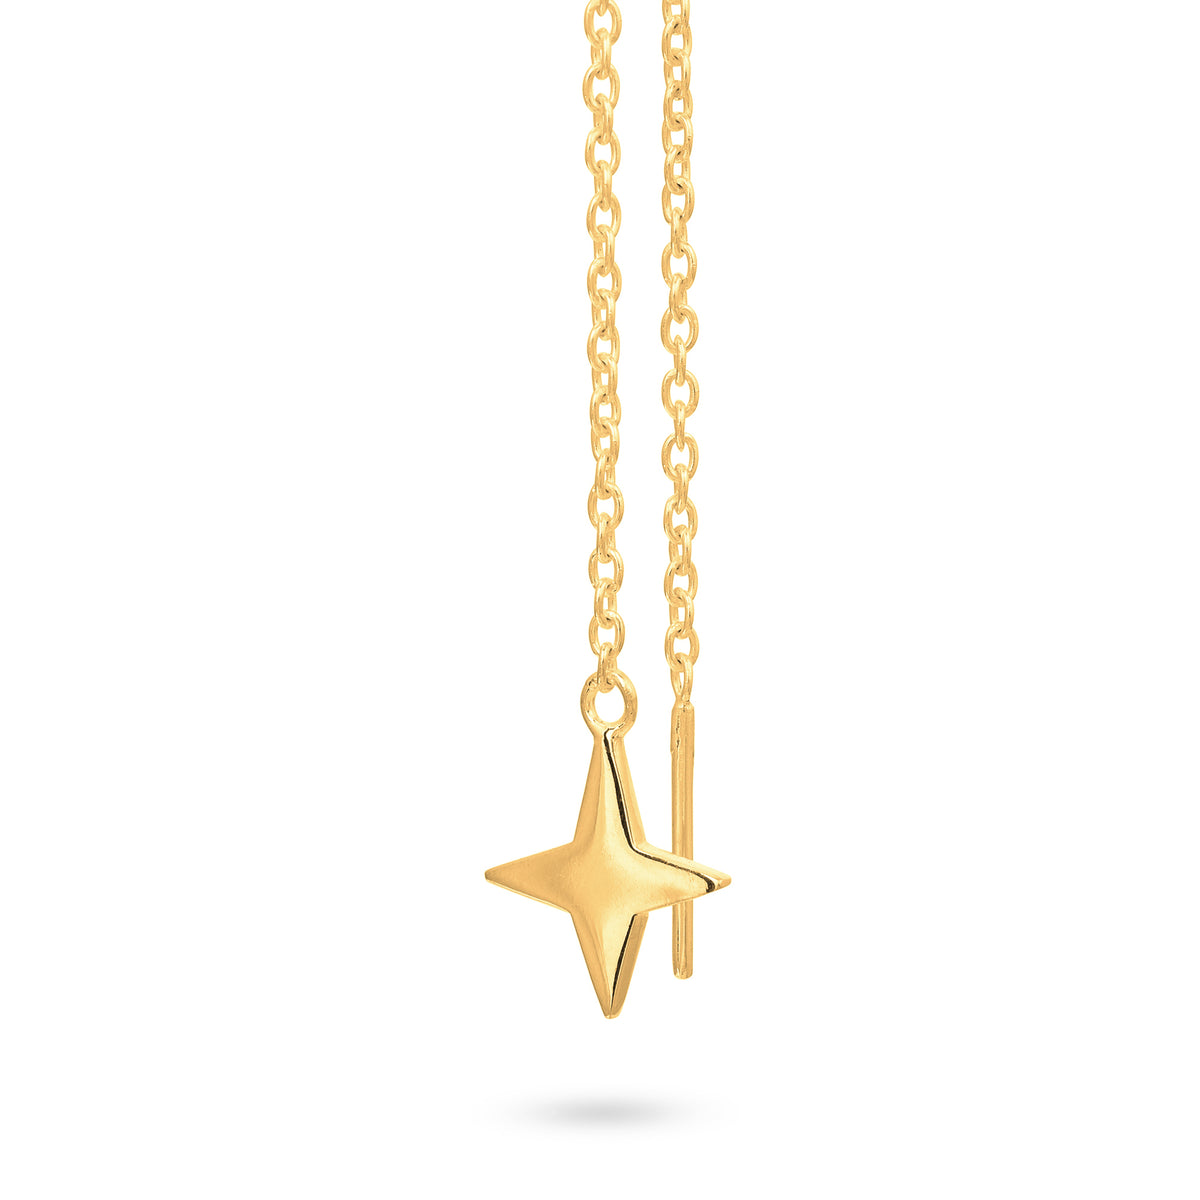 FLOATING STAR EARRINGS gold plated